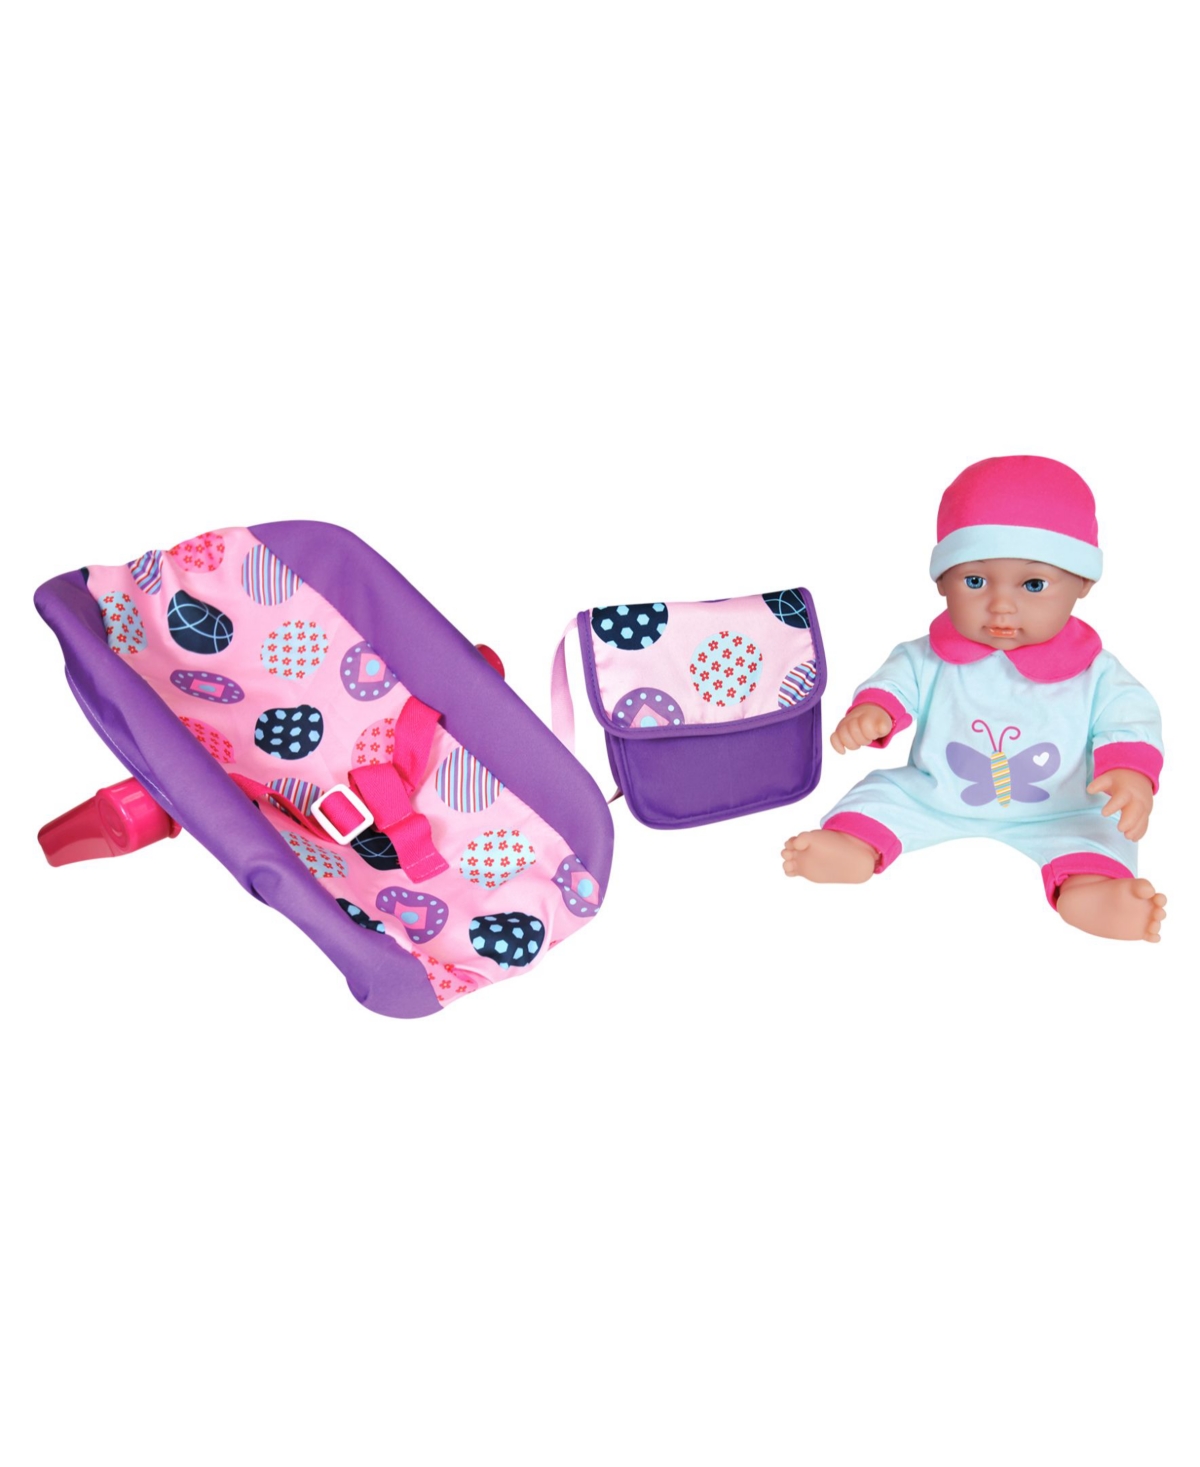 Lissi Dolls Baby Doll Travel Play Set, 3 Piece In Multi